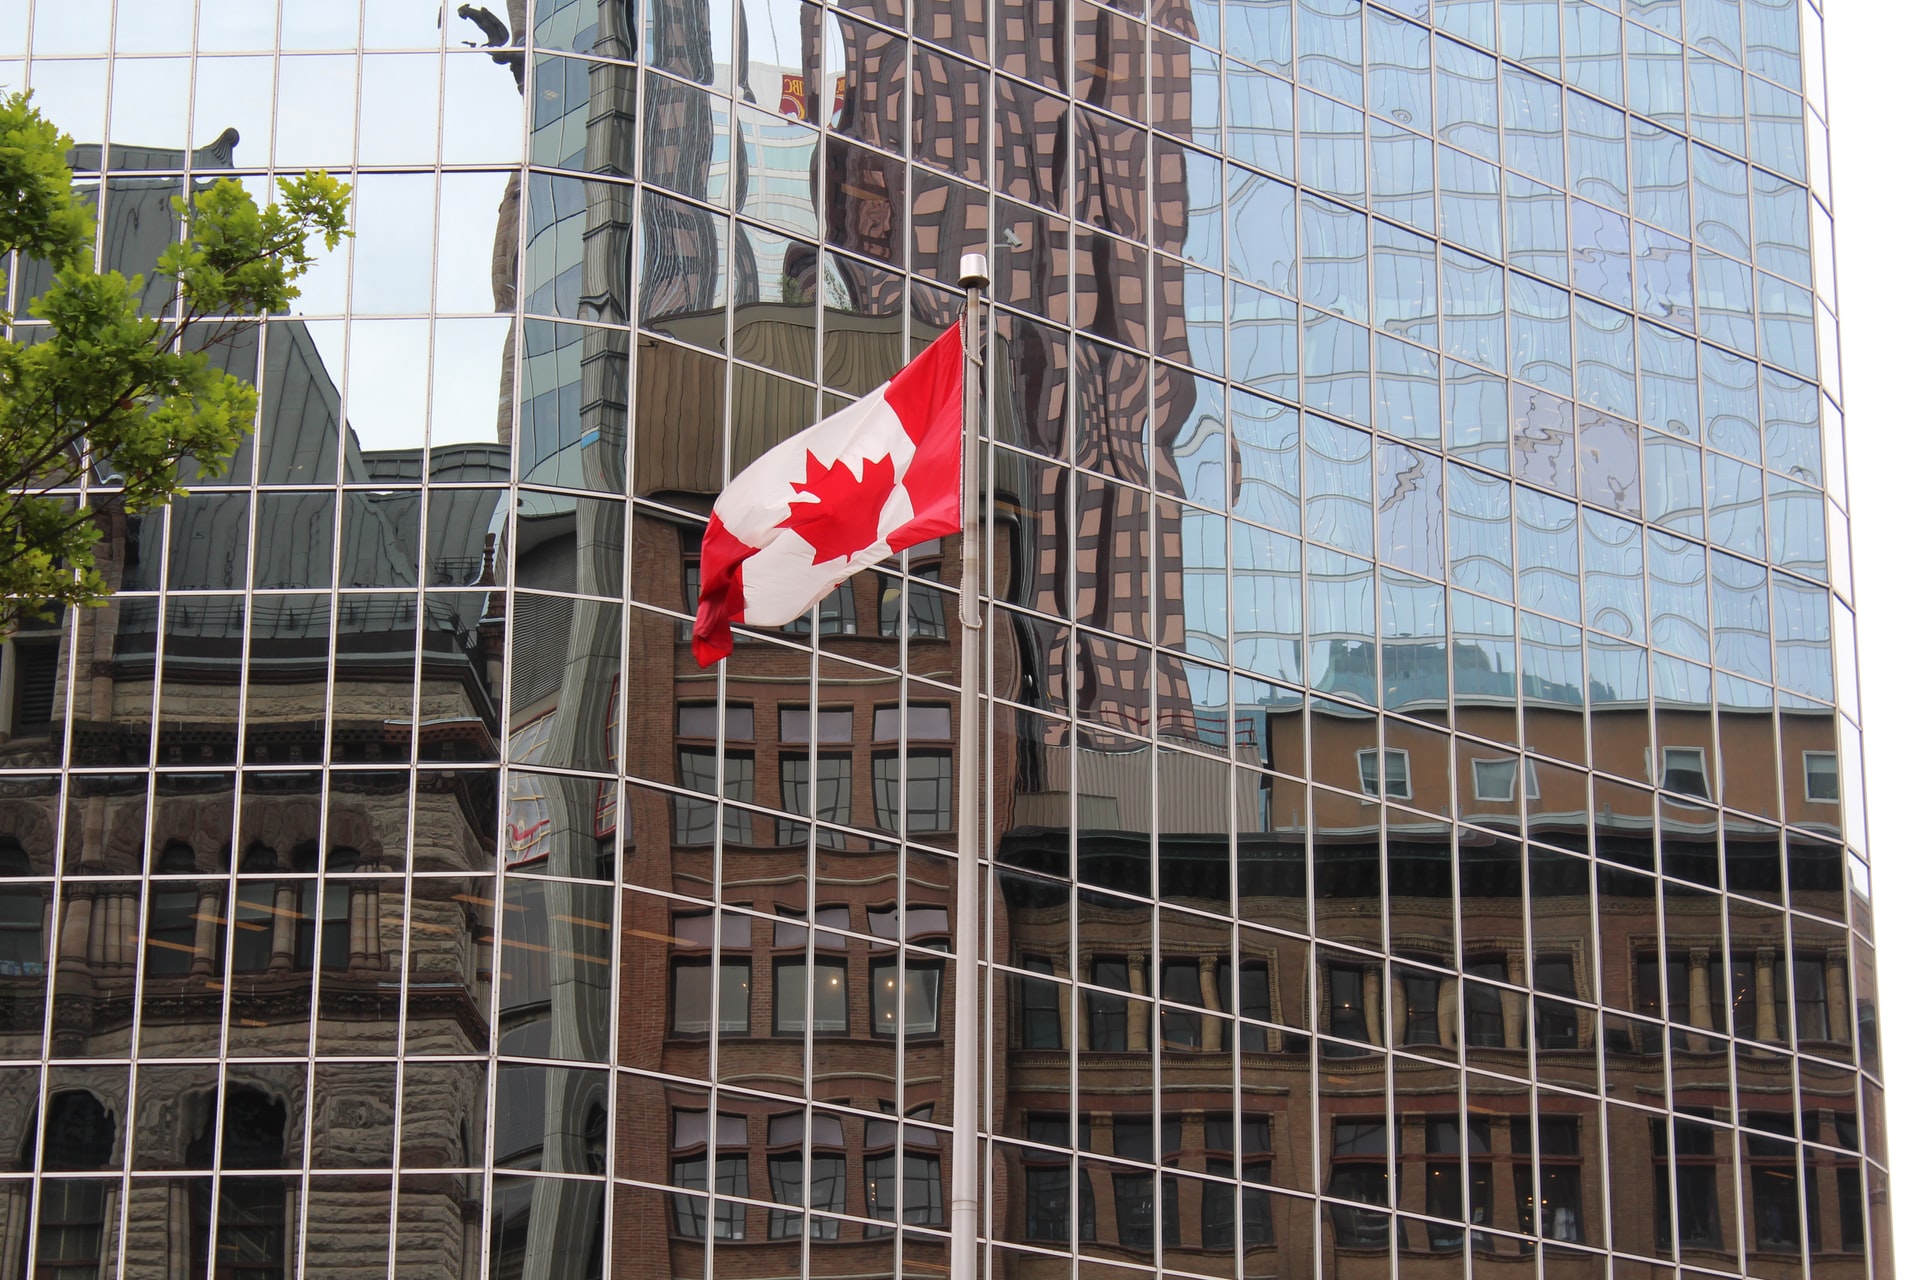 A Canadian flag next to an office tower representing an expansion of CEWS